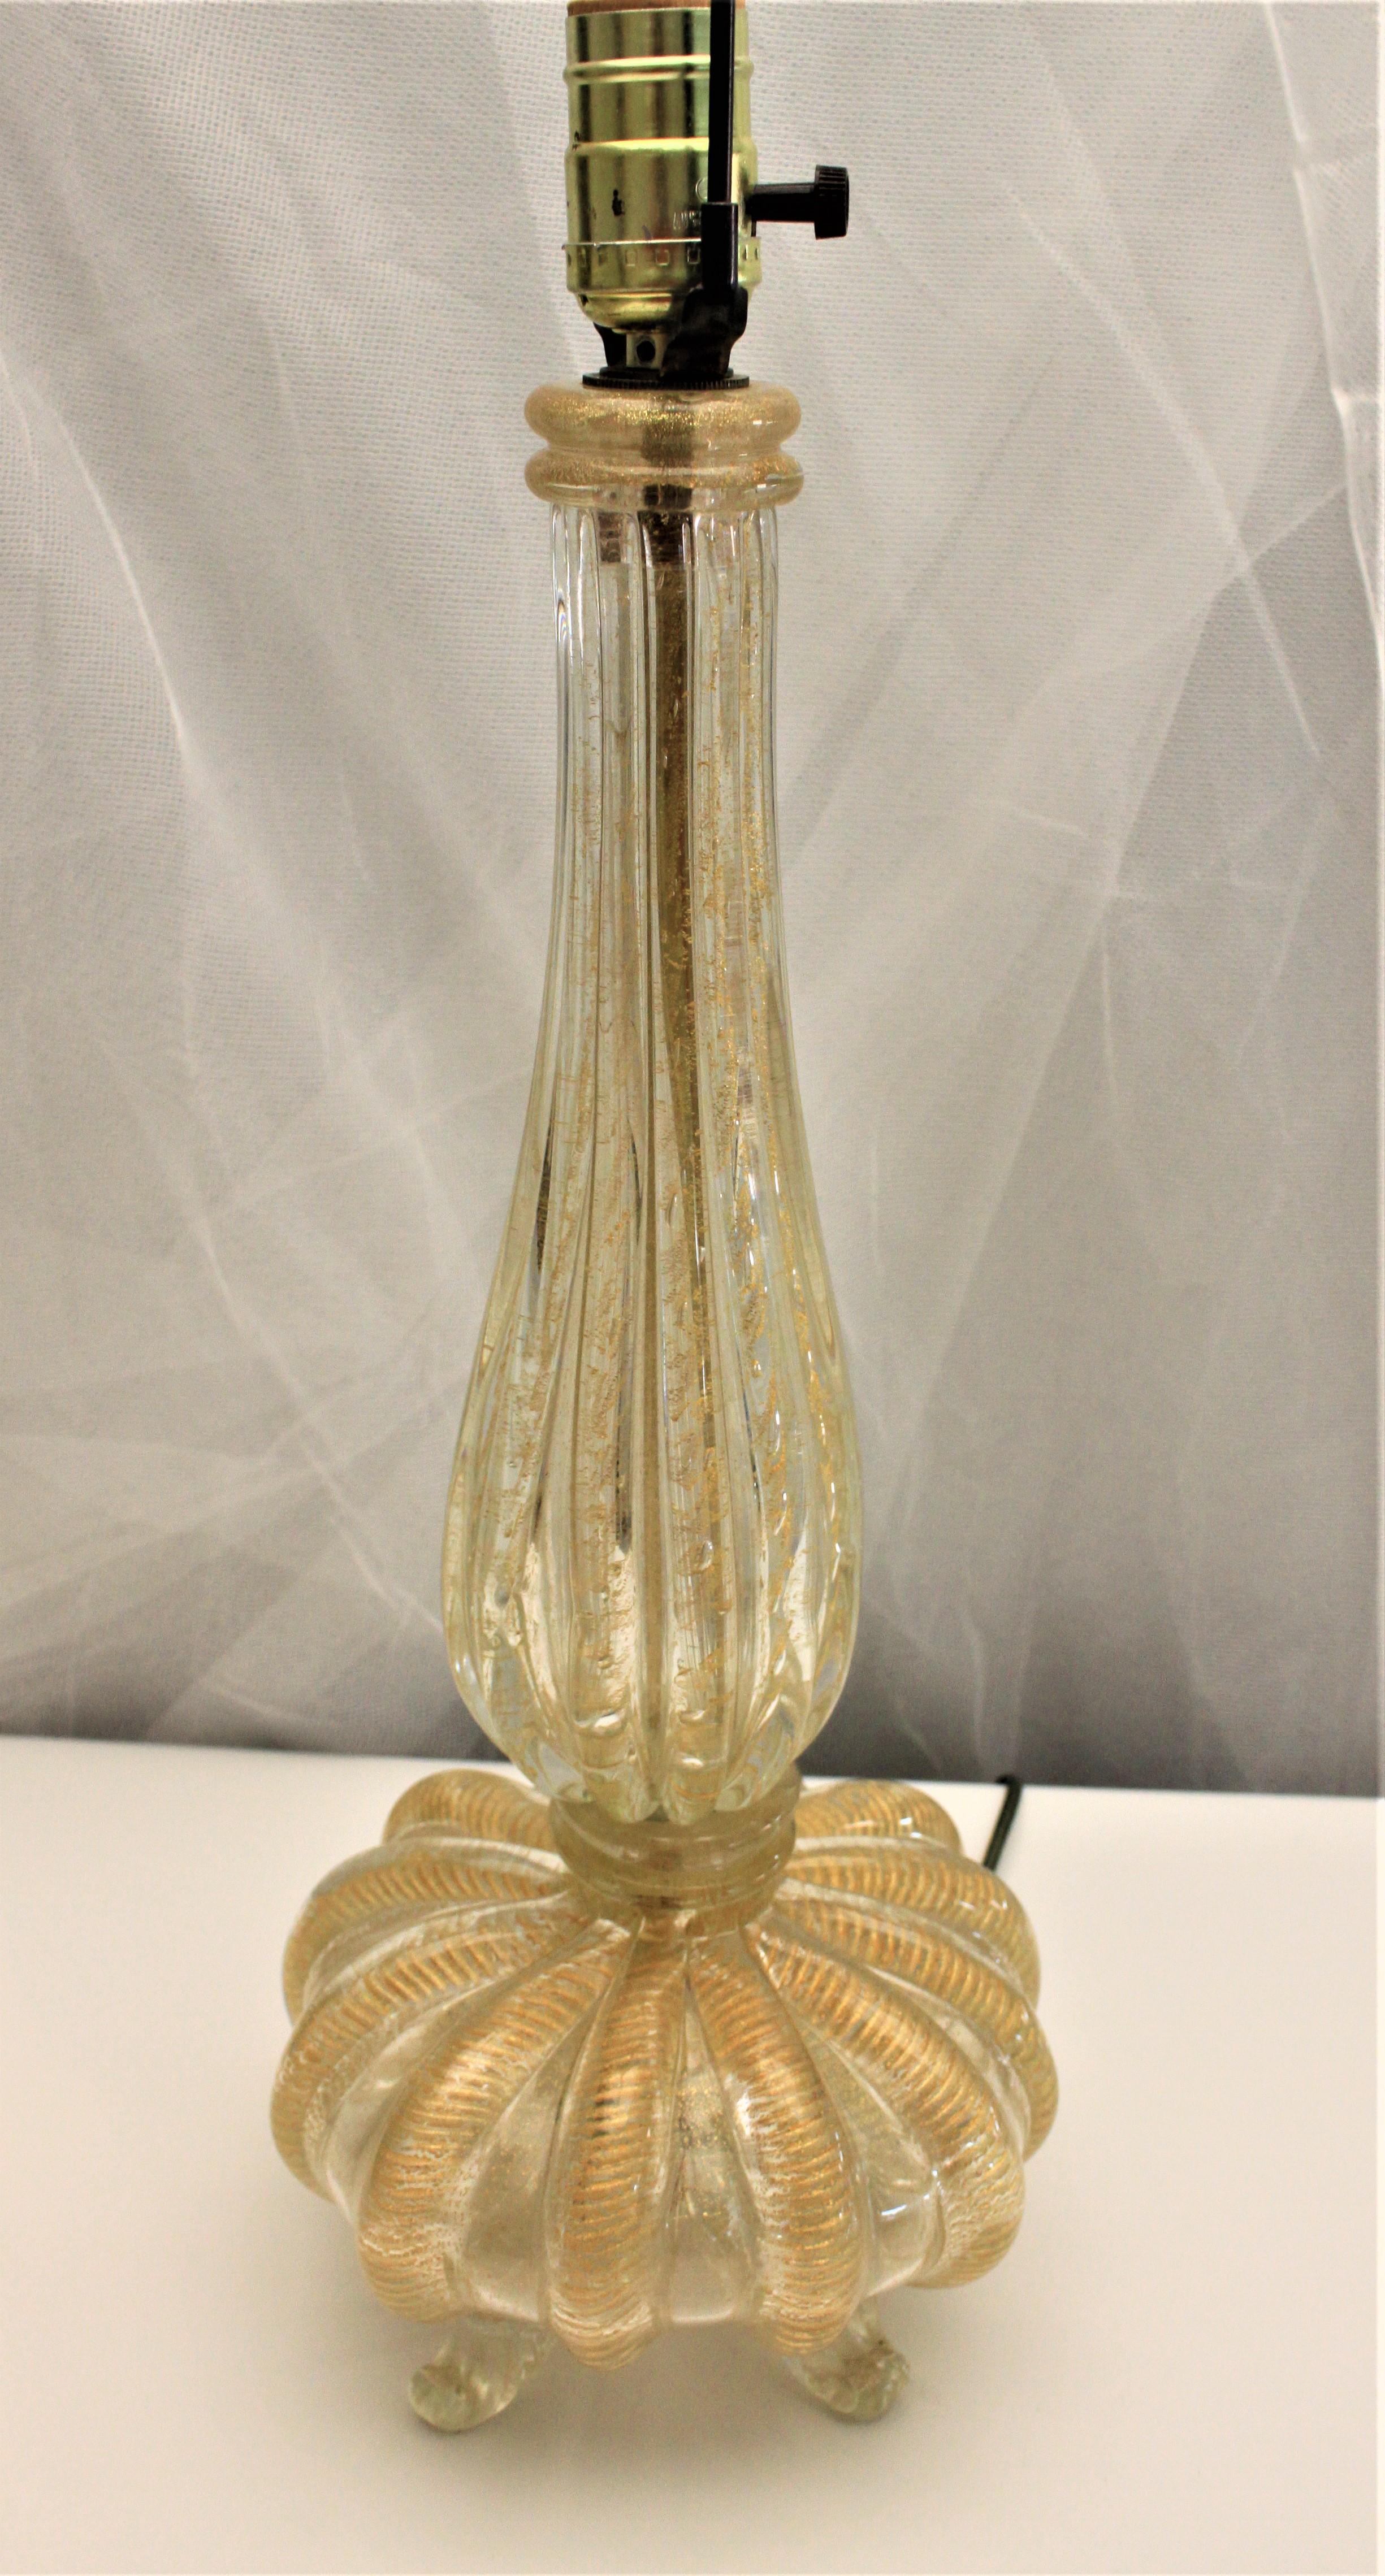 This Mid-Century Modern art glass table lamp is done with clear art glass with controlled bubbles and lots of gold flecks or aventurine with a tapered and ribbed body and a bulbous footed art glass base. Each rib of the lamp is accented by a gold